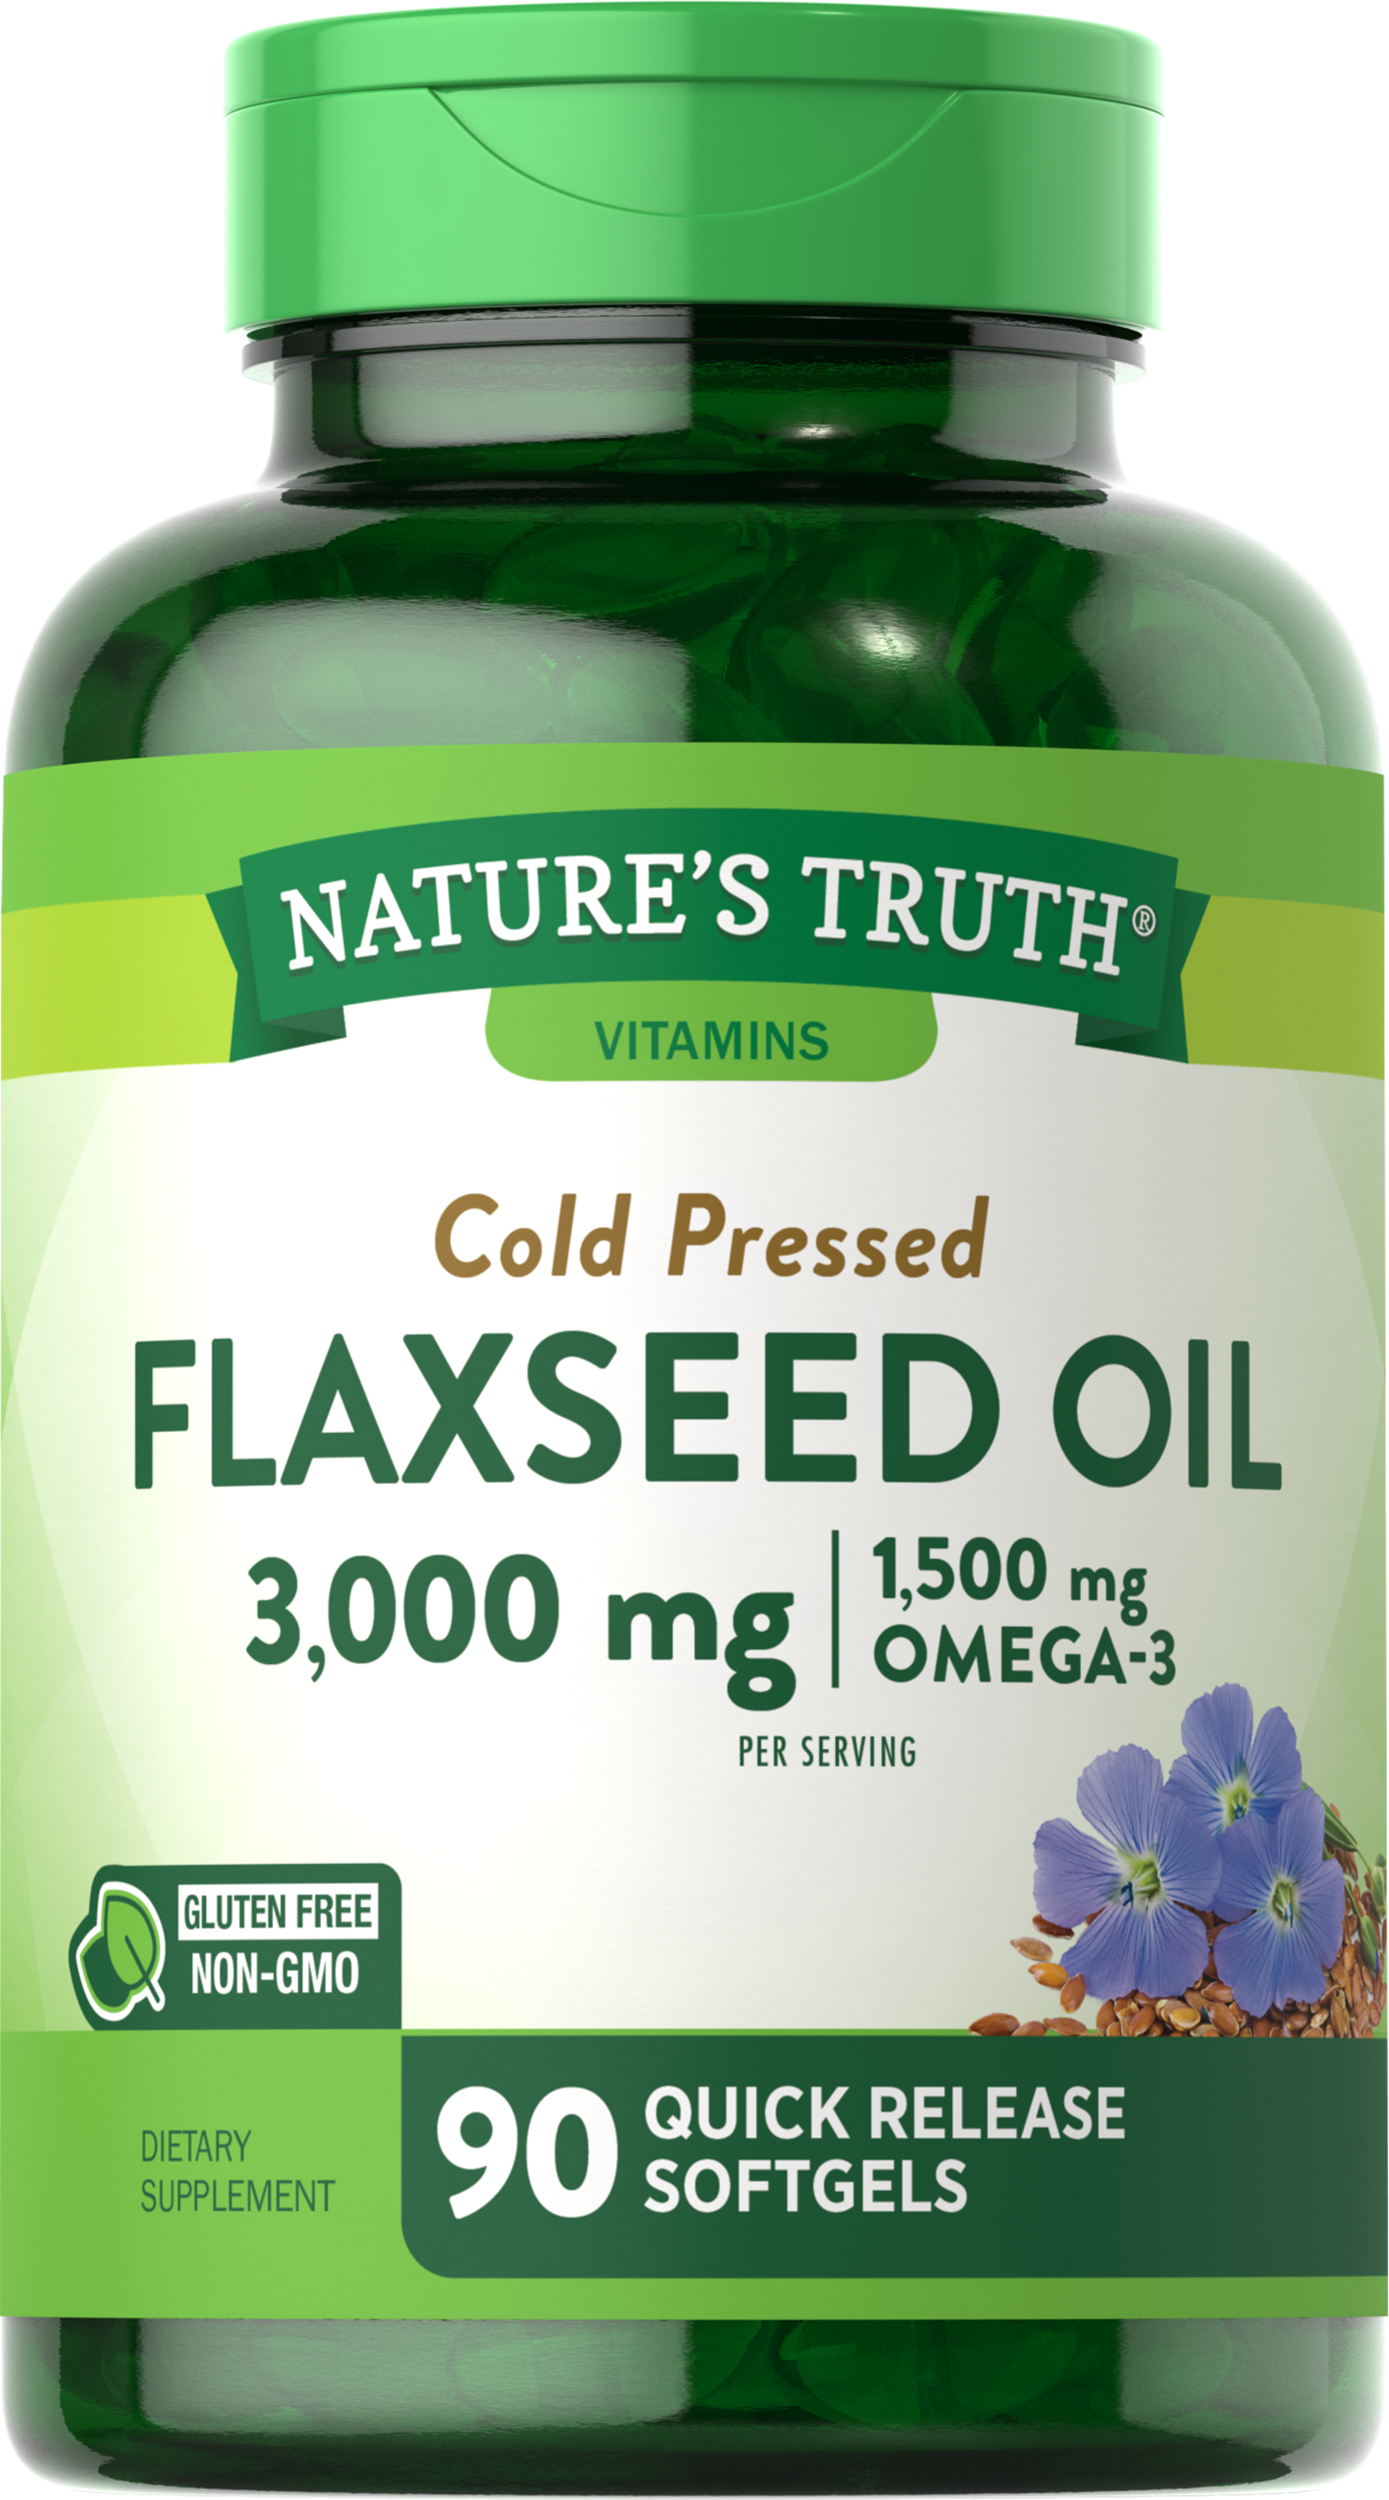 Flaxseed Oil 3000 mg with 1500 mg of Omega 3